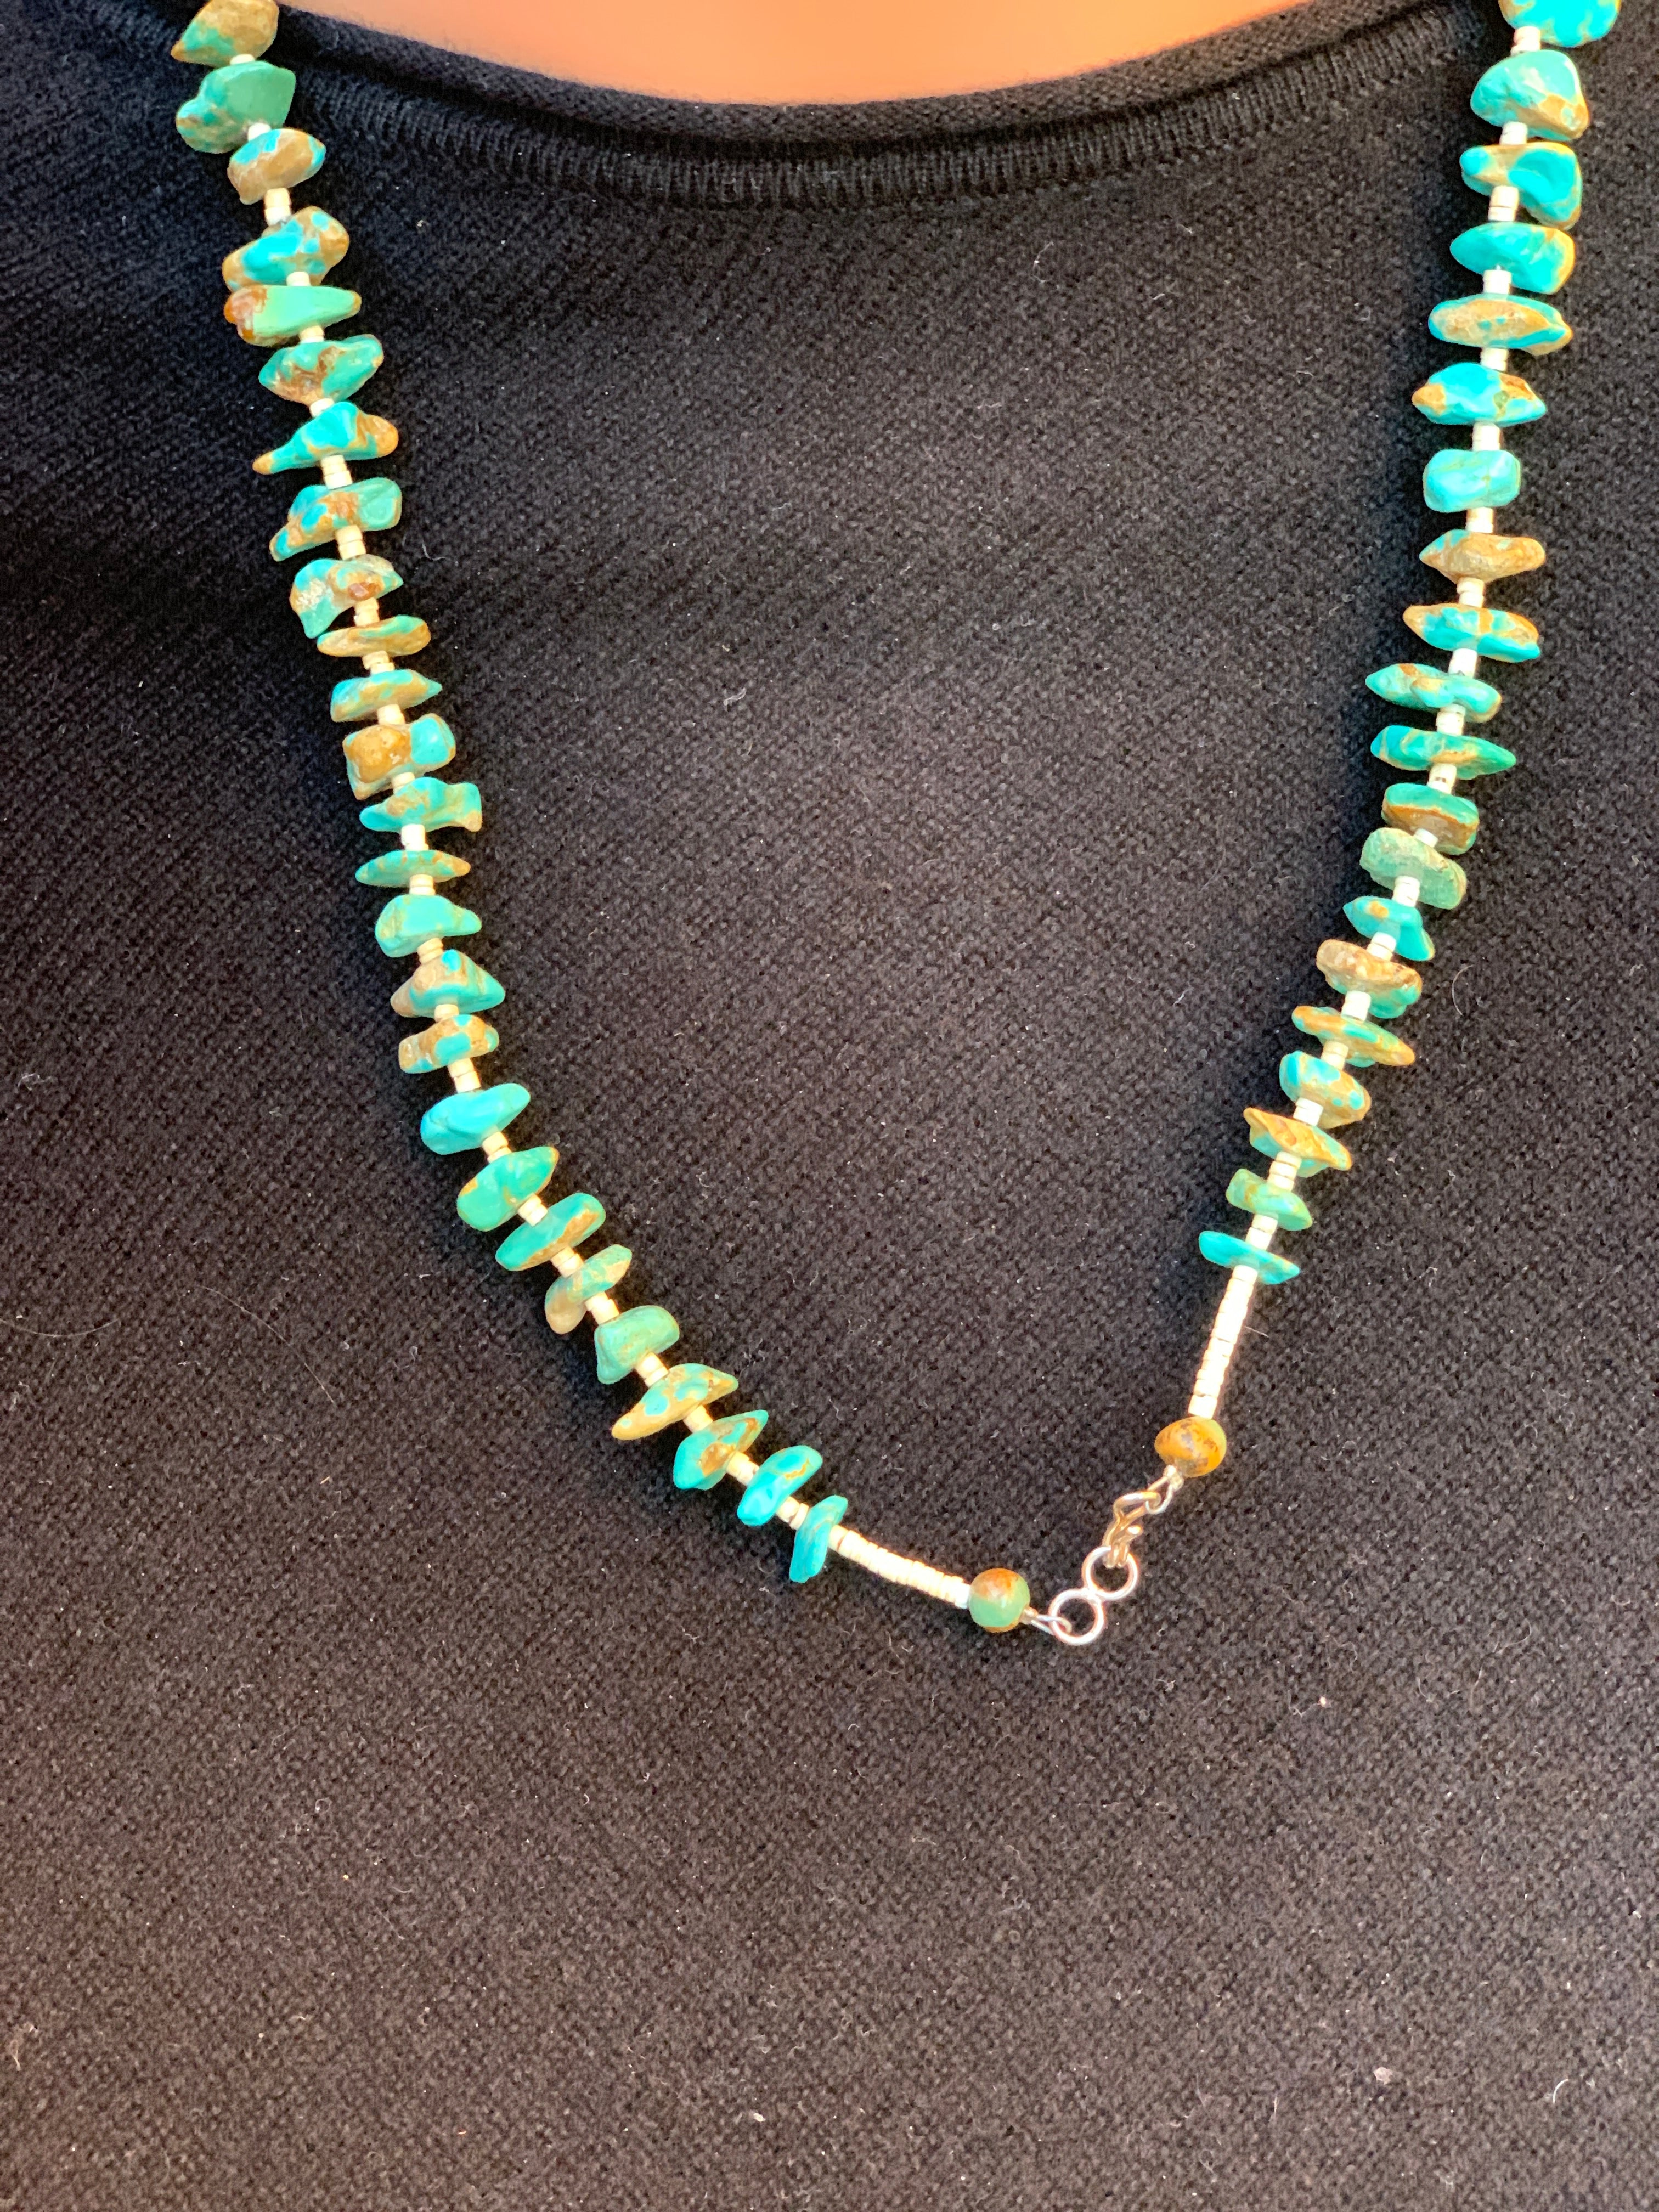 28" Chimney Butte Kingman Turquoise Hand Strung with Heishi Bead Necklace NK30